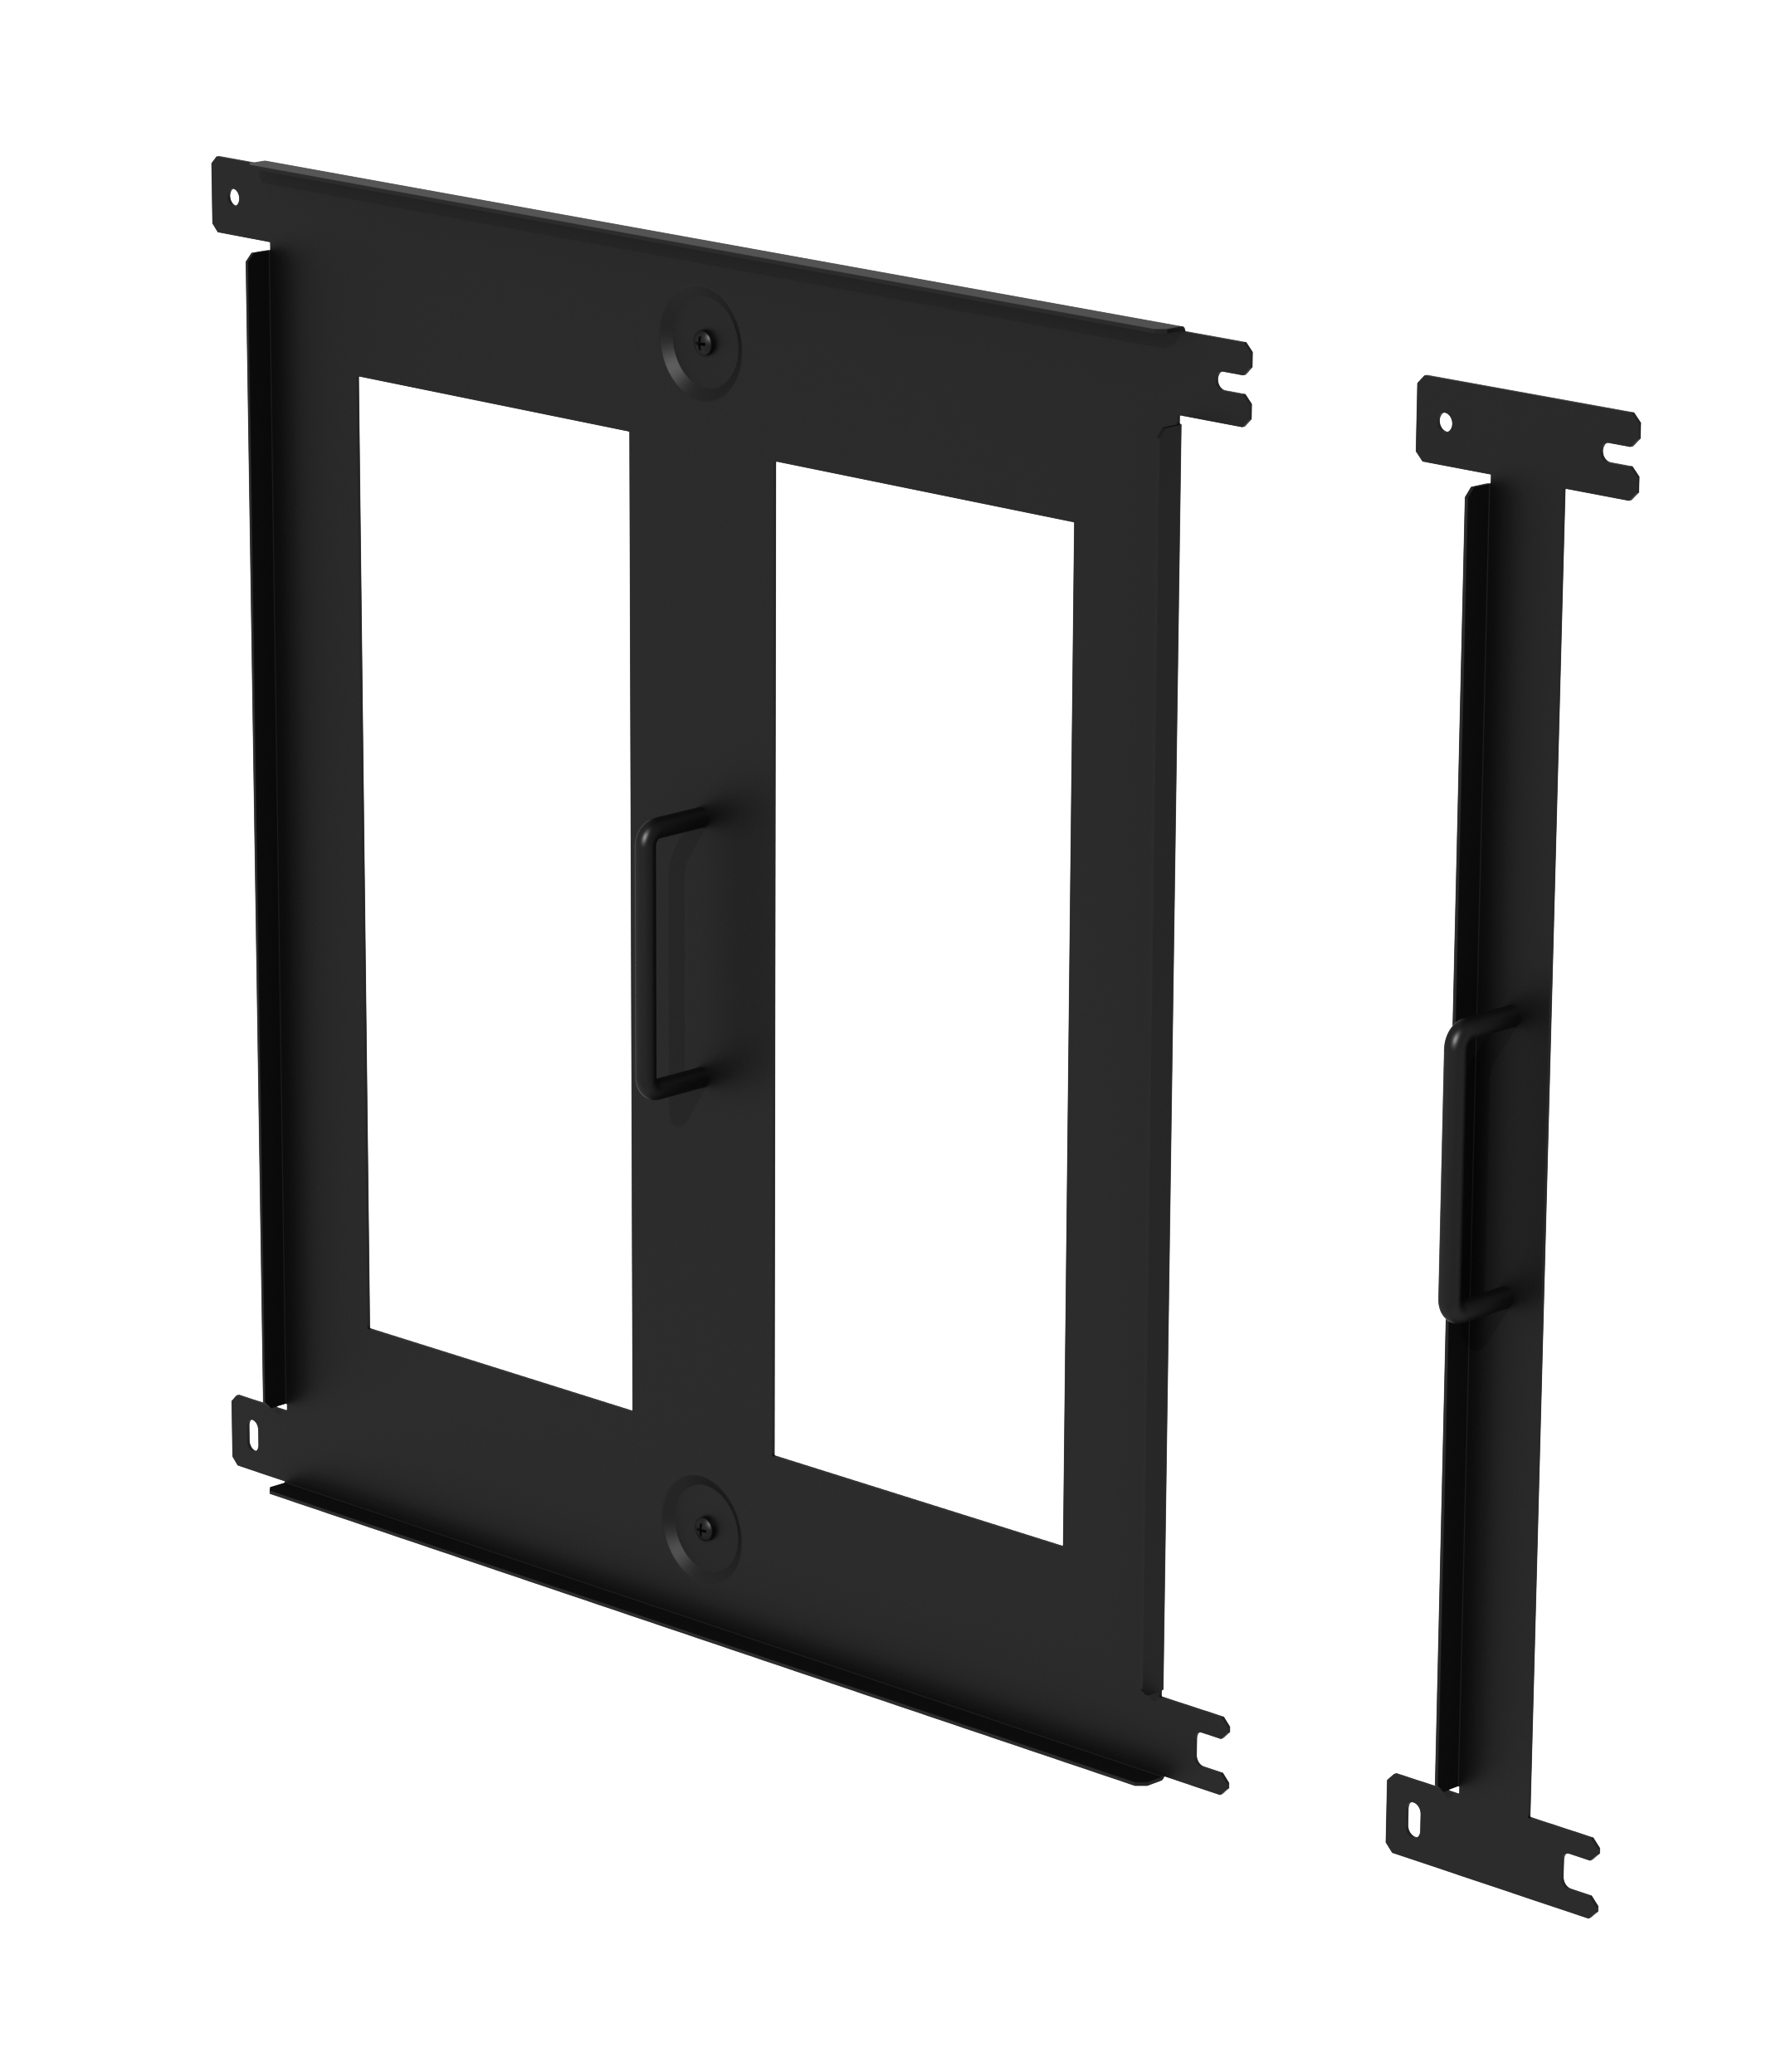 DS-VWRS052 Reusable Video Wall Spacer